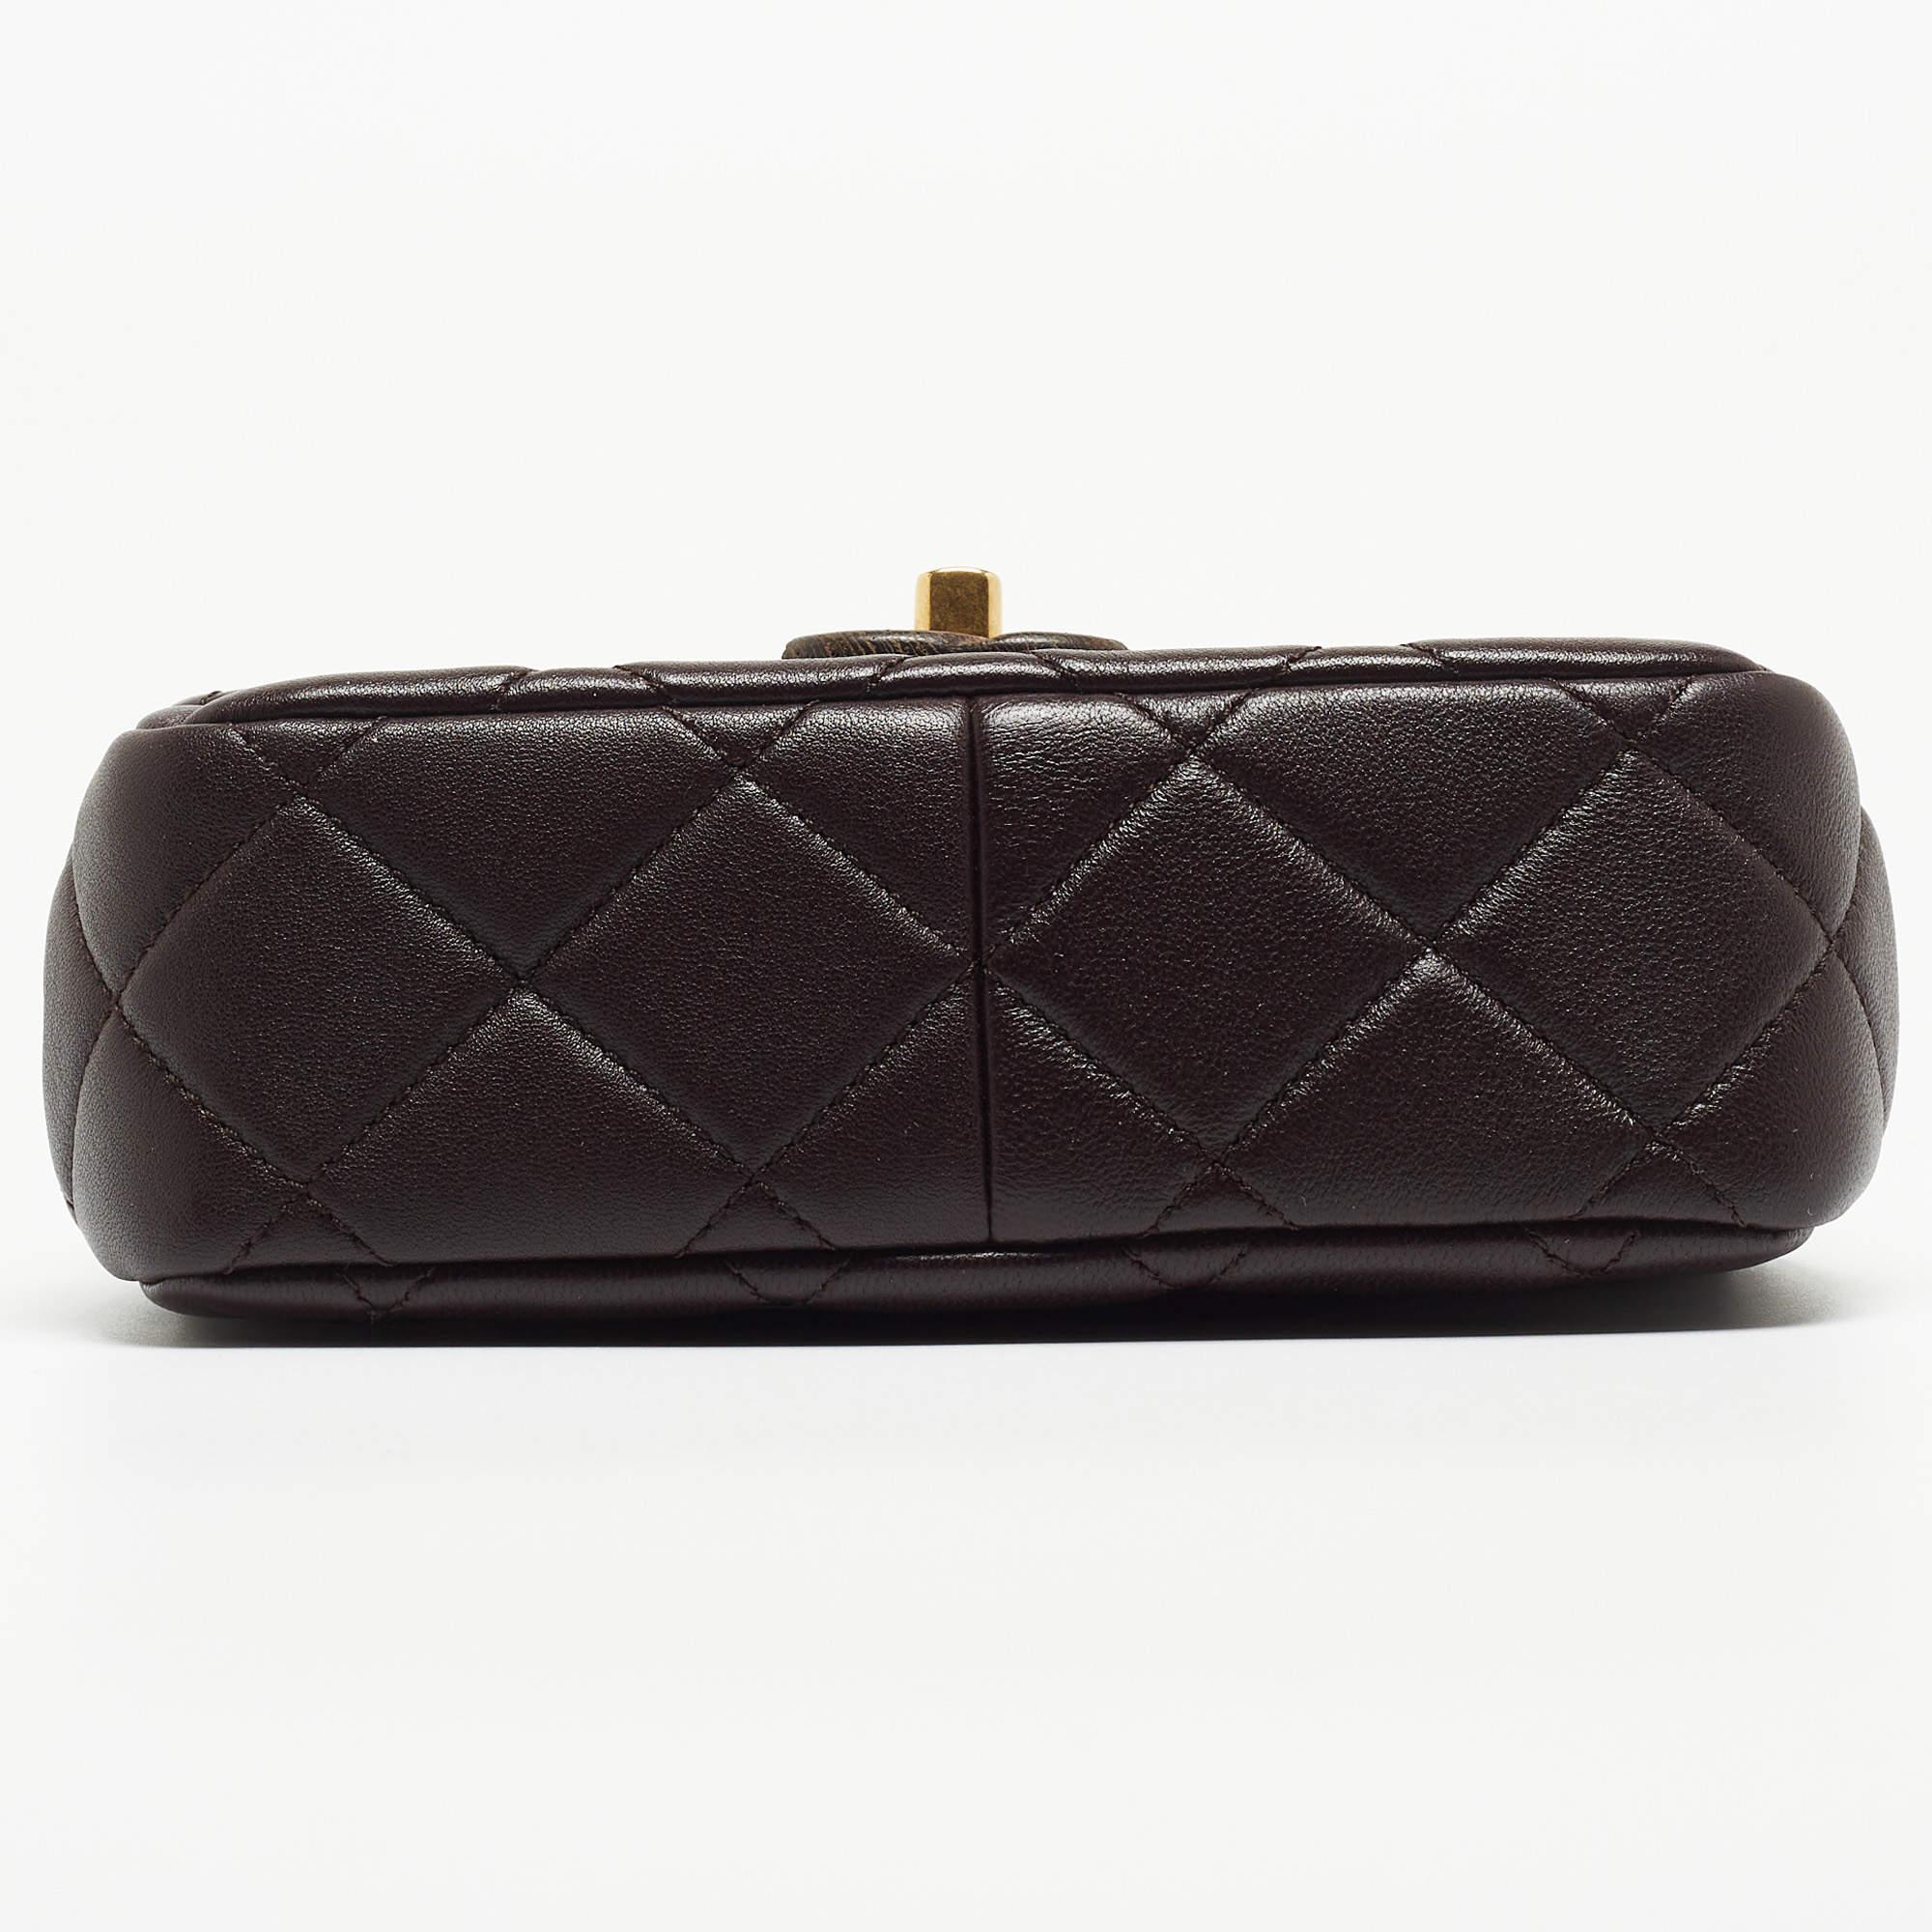 Women's Chanel Burgundy Quilted Leather and Wood Mini Flap Bag